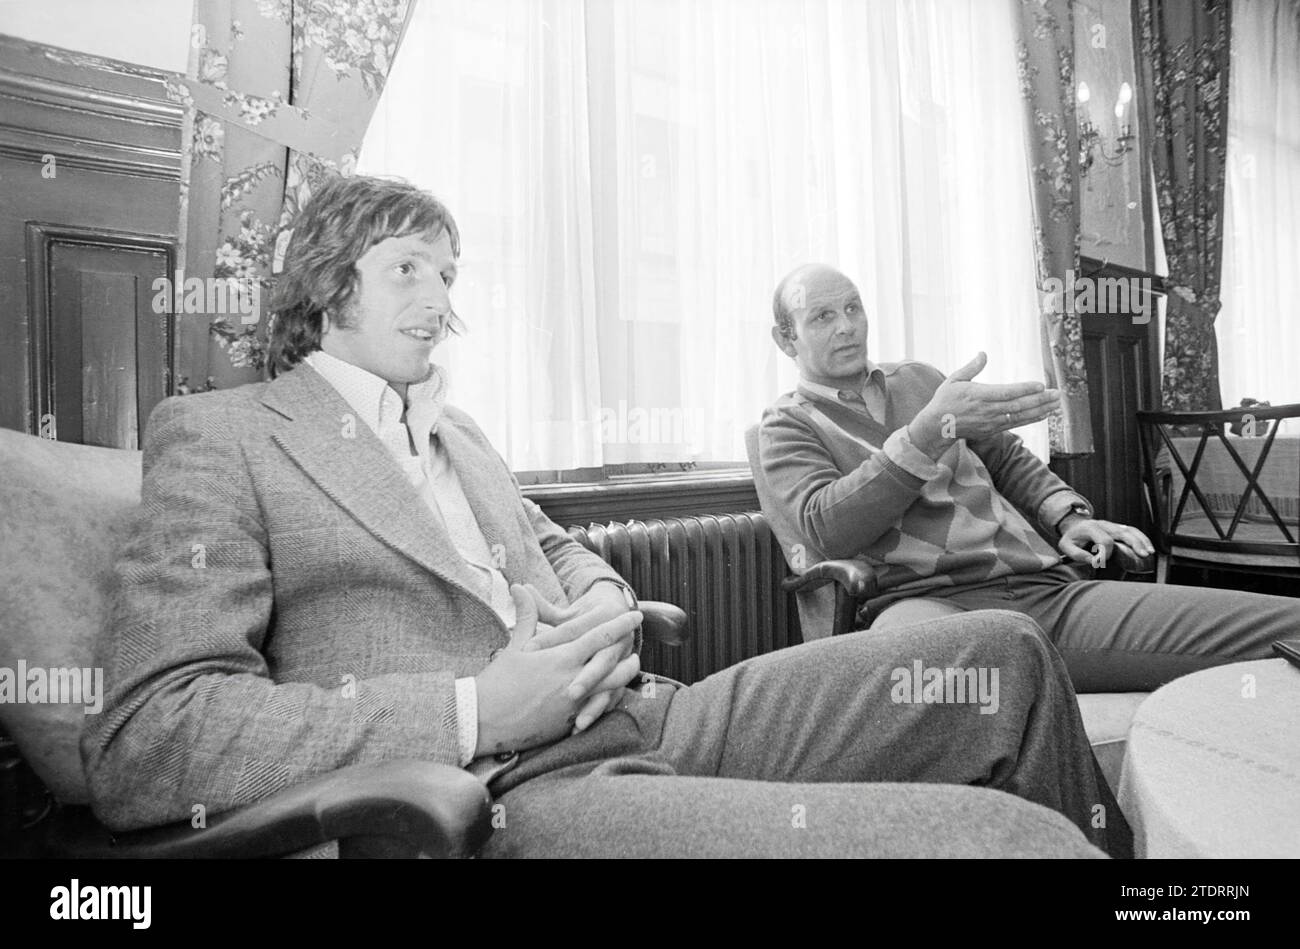 Scottish player J. Cordna van Haarlem with Barry Hughes, Football Haarlem, 20-06-1973, Whizgle News from the Past, Tailored for the Future. Explore historical narratives, Dutch The Netherlands agency image with a modern perspective, bridging the gap between yesterday's events and tomorrow's insights. A timeless journey shaping the stories that shape our future Stock Photo